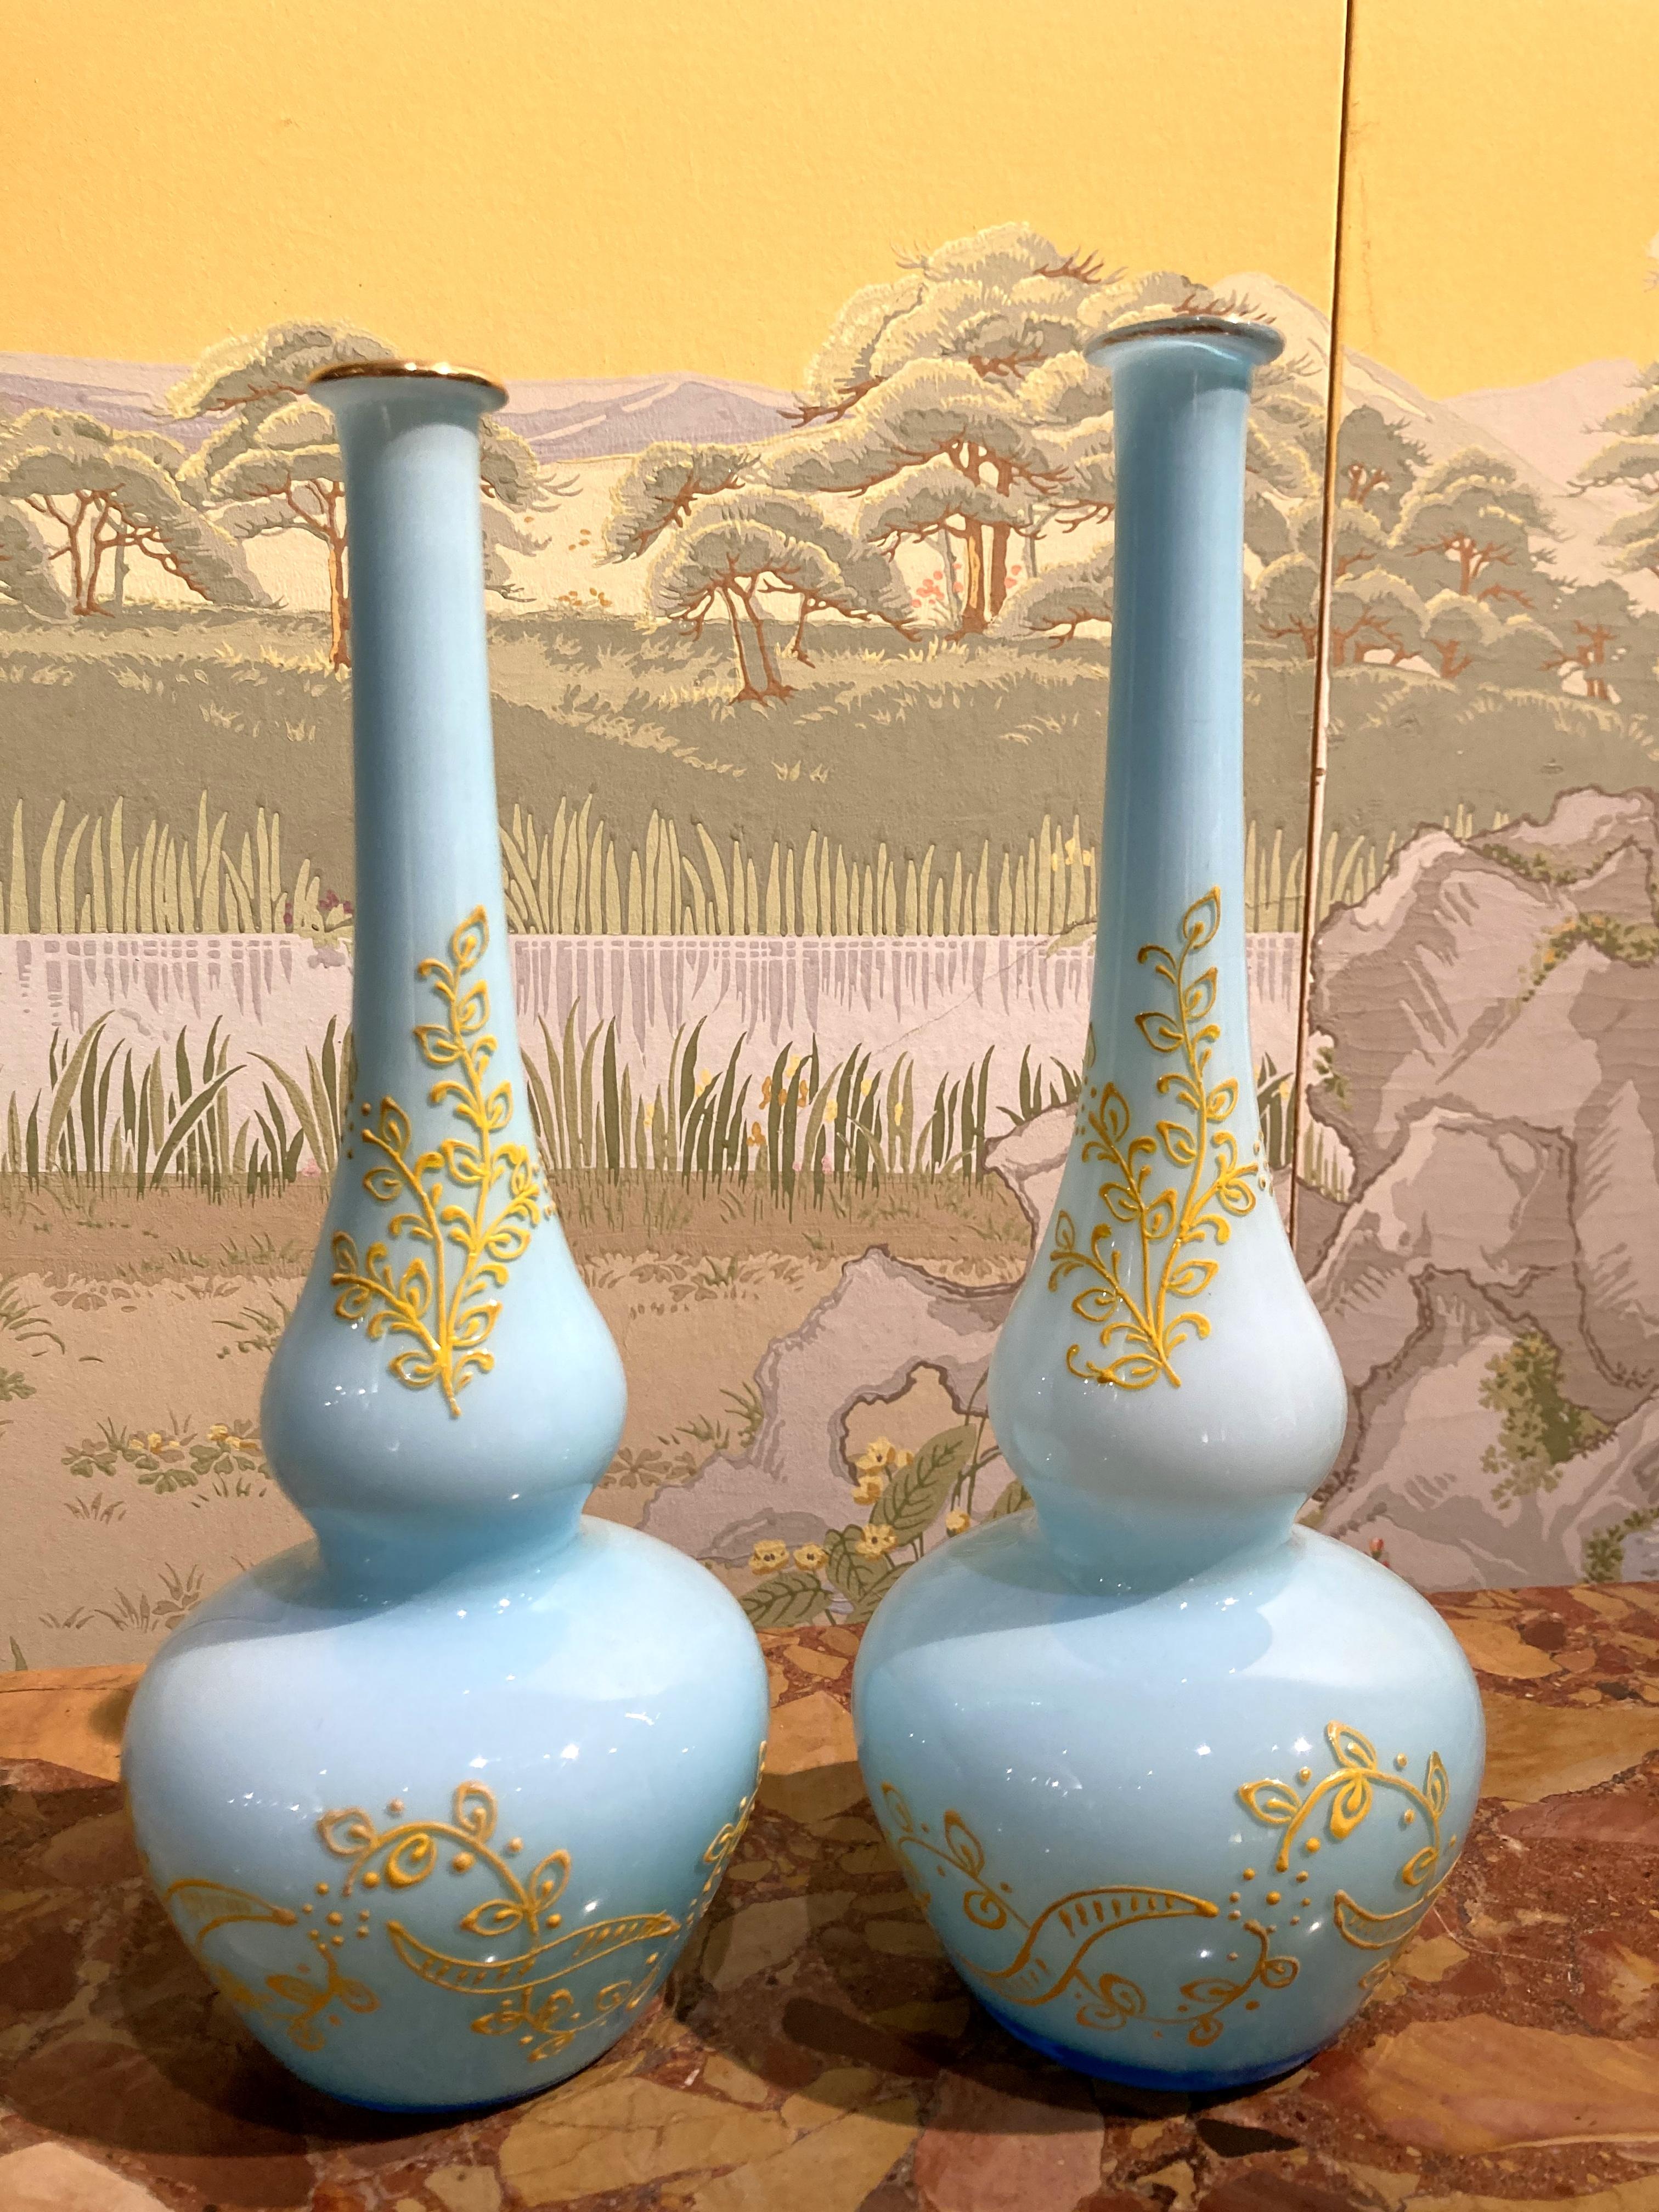 This pair of Italian Mid-Century Modern Murano opaline glass soliflower vases boast a funny trumpet and round belly shape, the most wonderful translucent turquoise color, a lovely yellow hand painted leavy decor and a gilded rim on top. 
The yellow